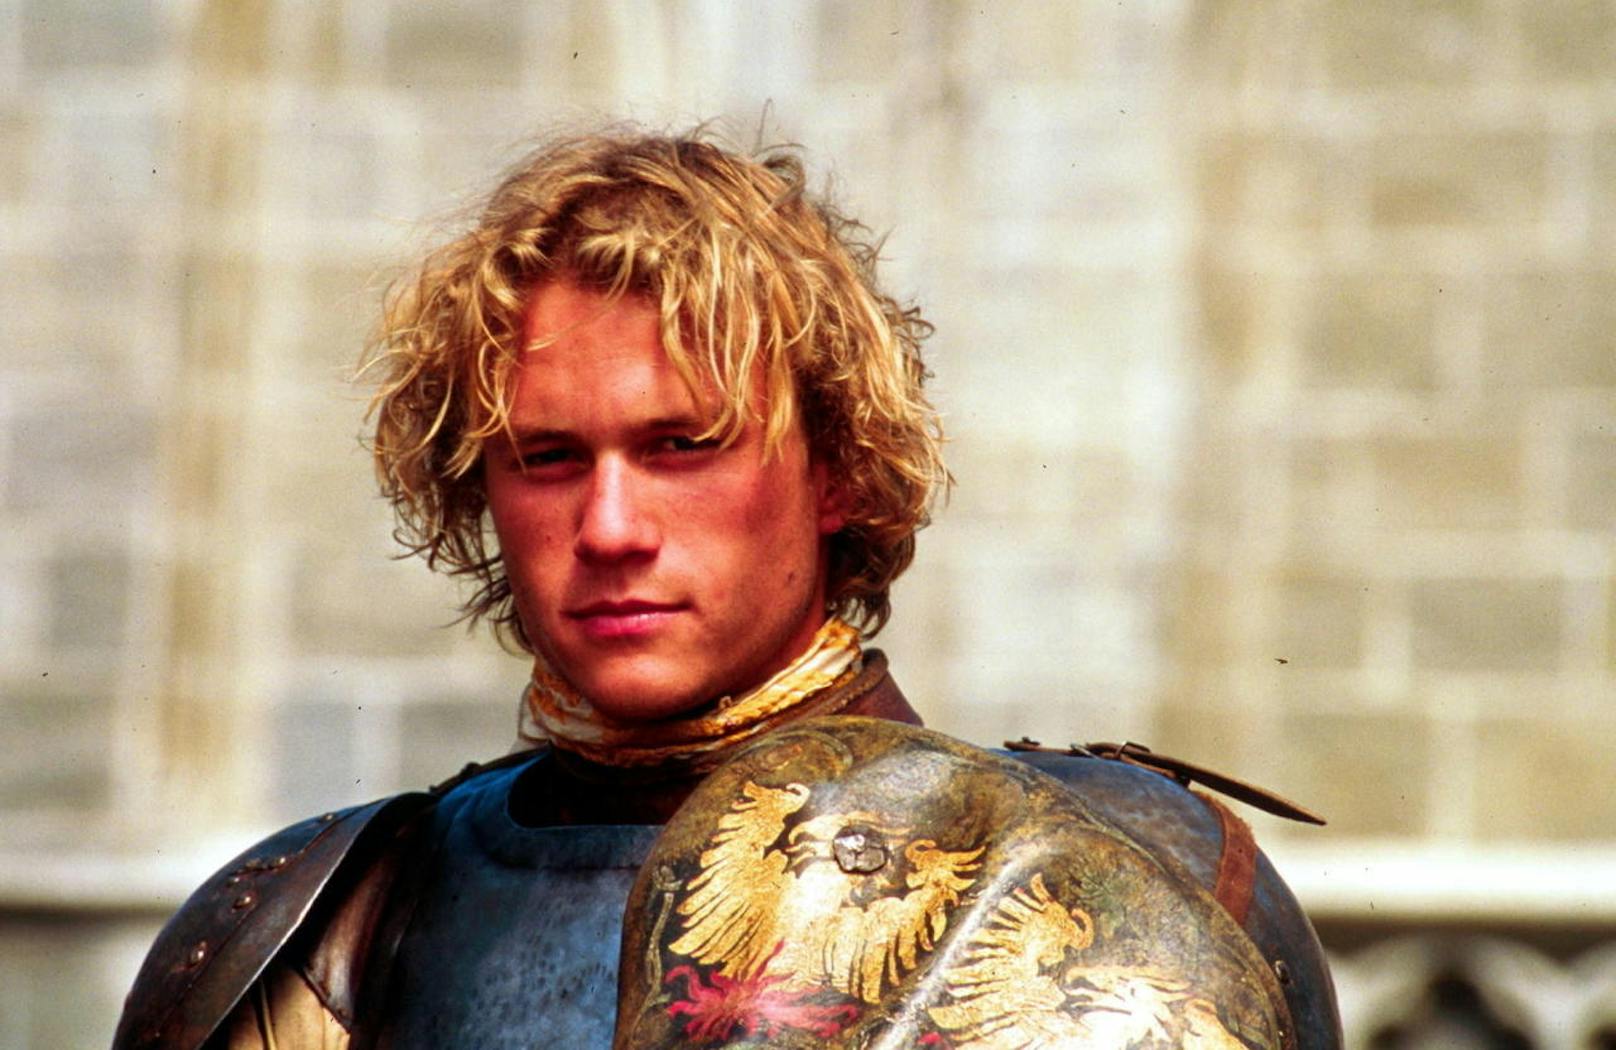 Heath Ledger in "A Knights Tale"